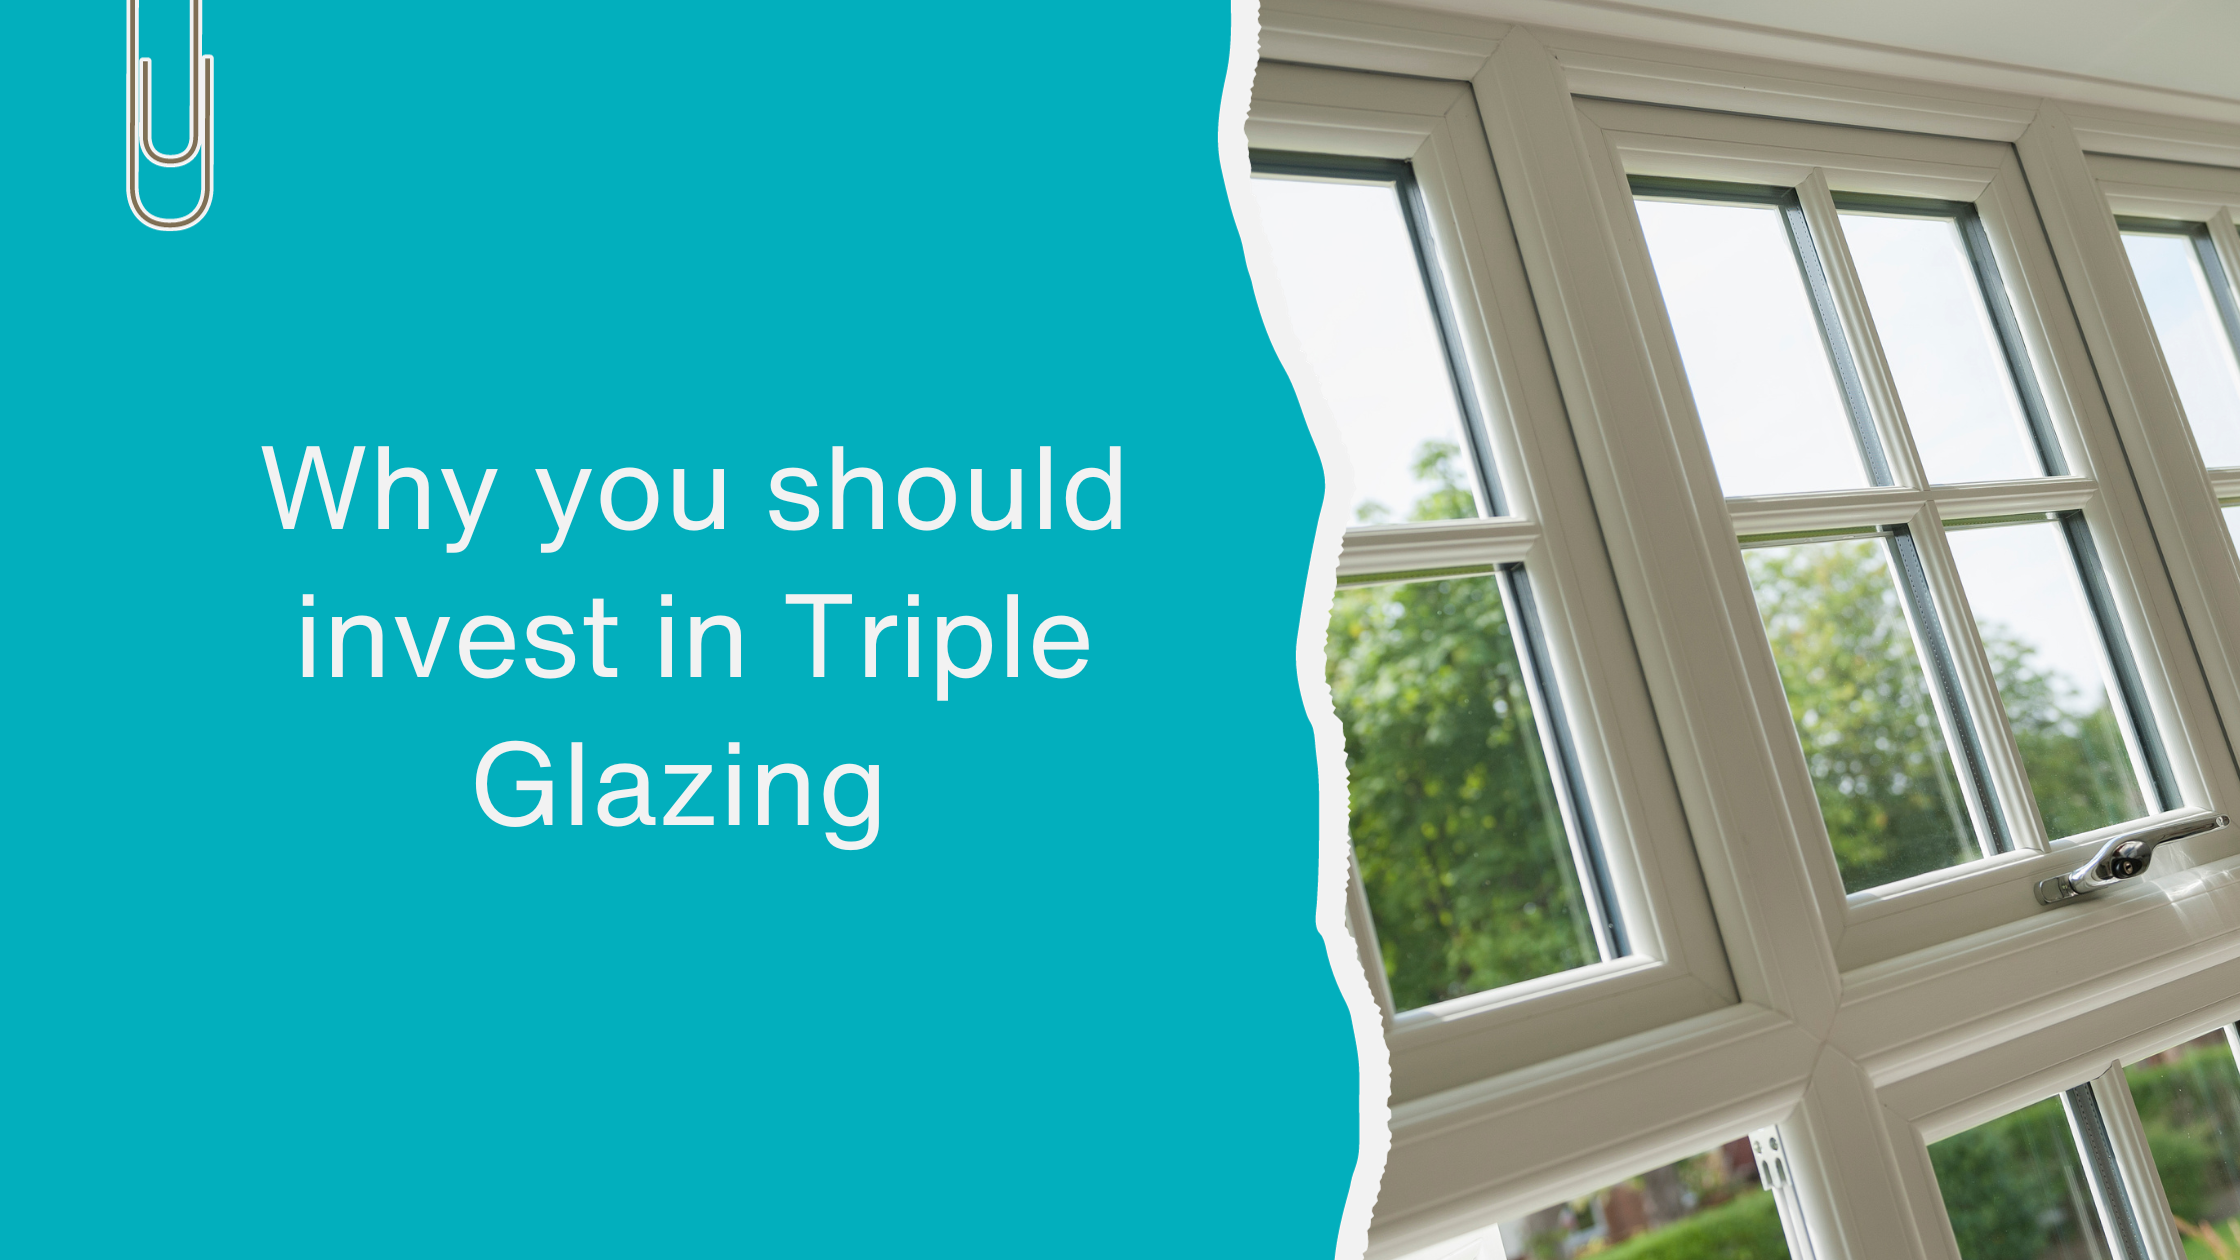 Why you should Invest in Triple Glazing